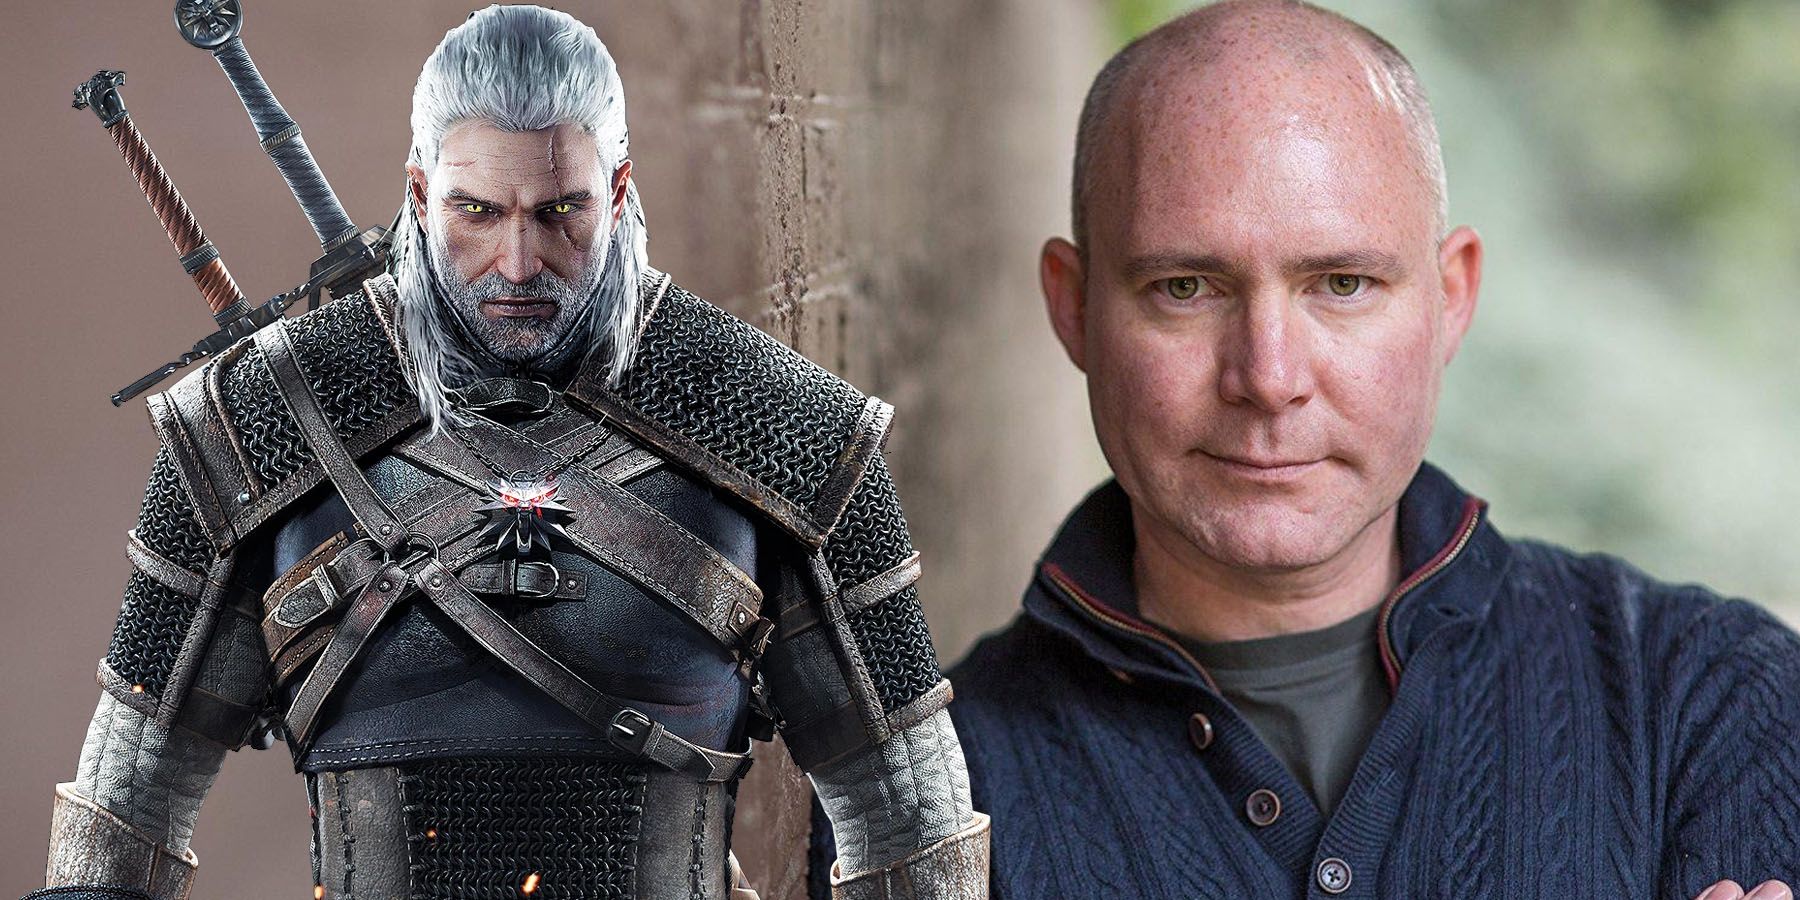 A photo of voice actor Doug Cockle, with Geralt of Rivea from The Witcher 3 placed alongside him.